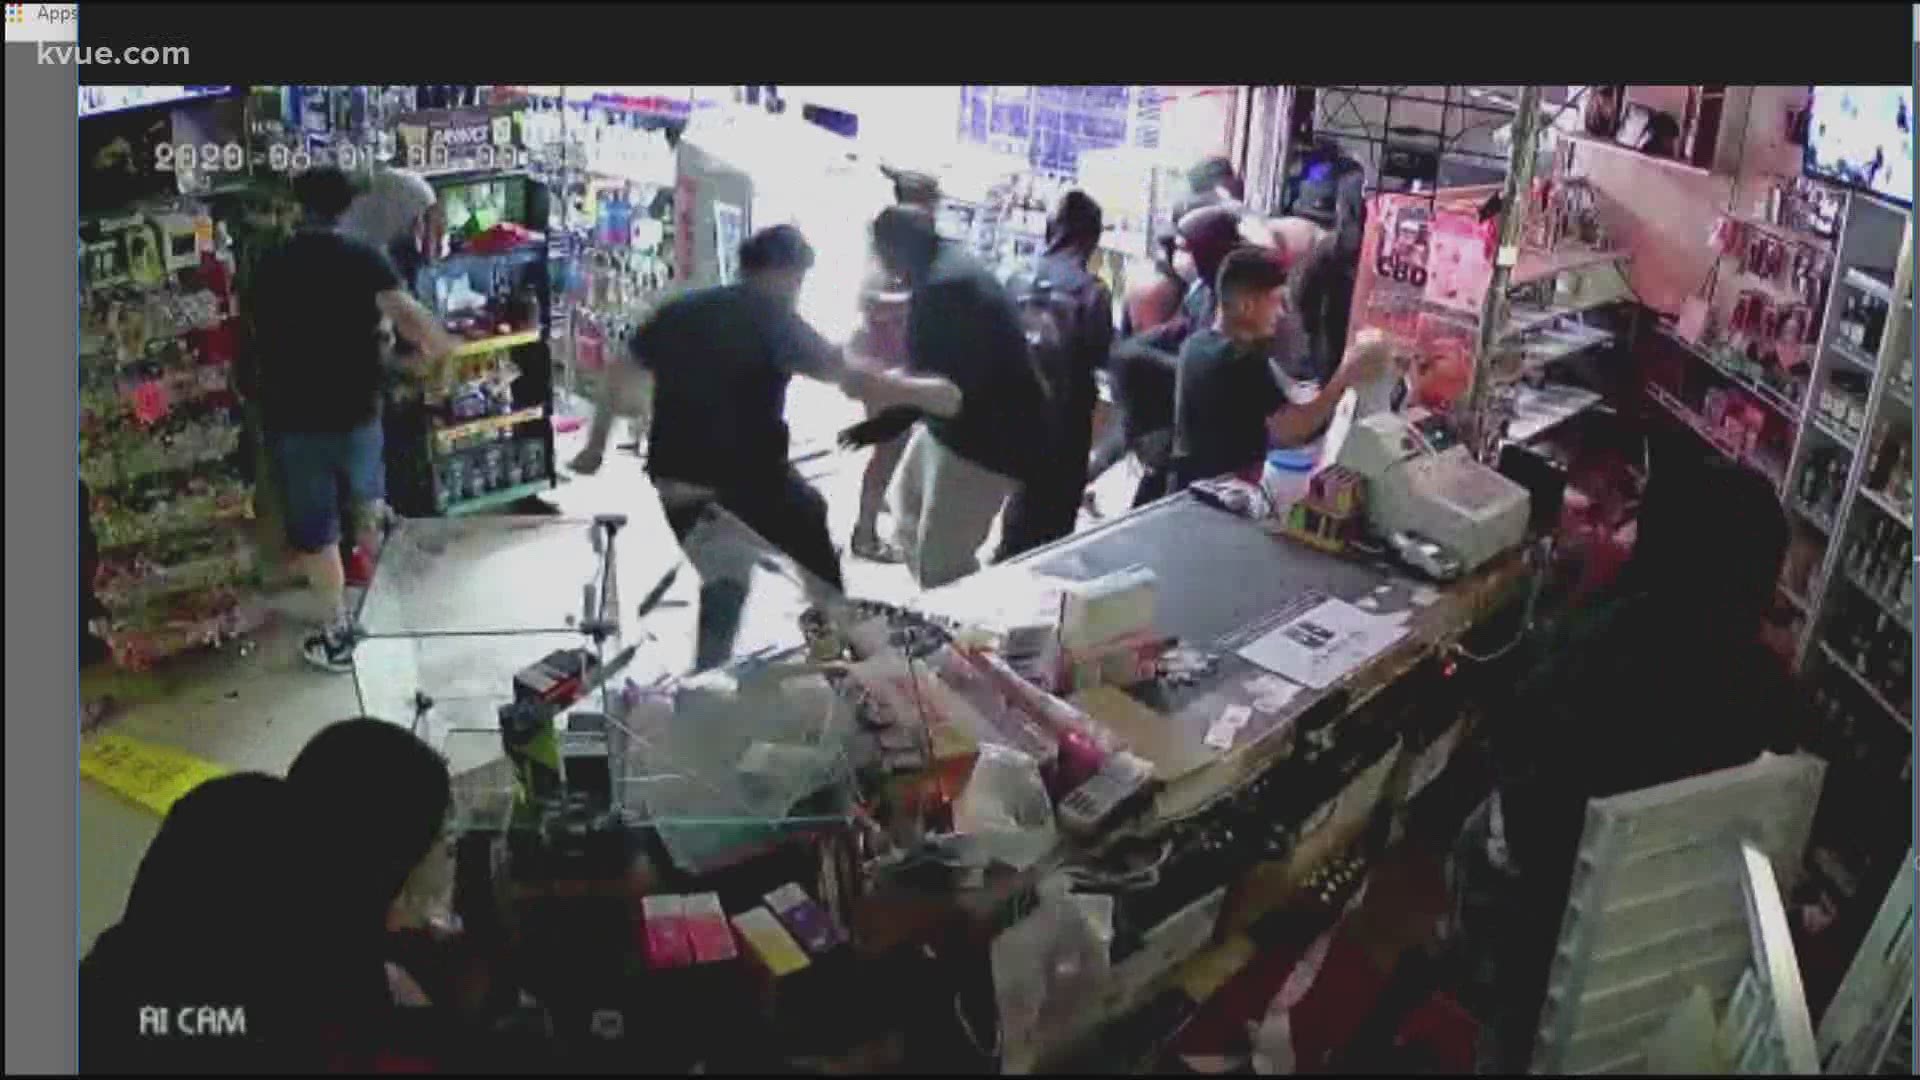 The looters were caught on camera amid protests in Downtown Austin.